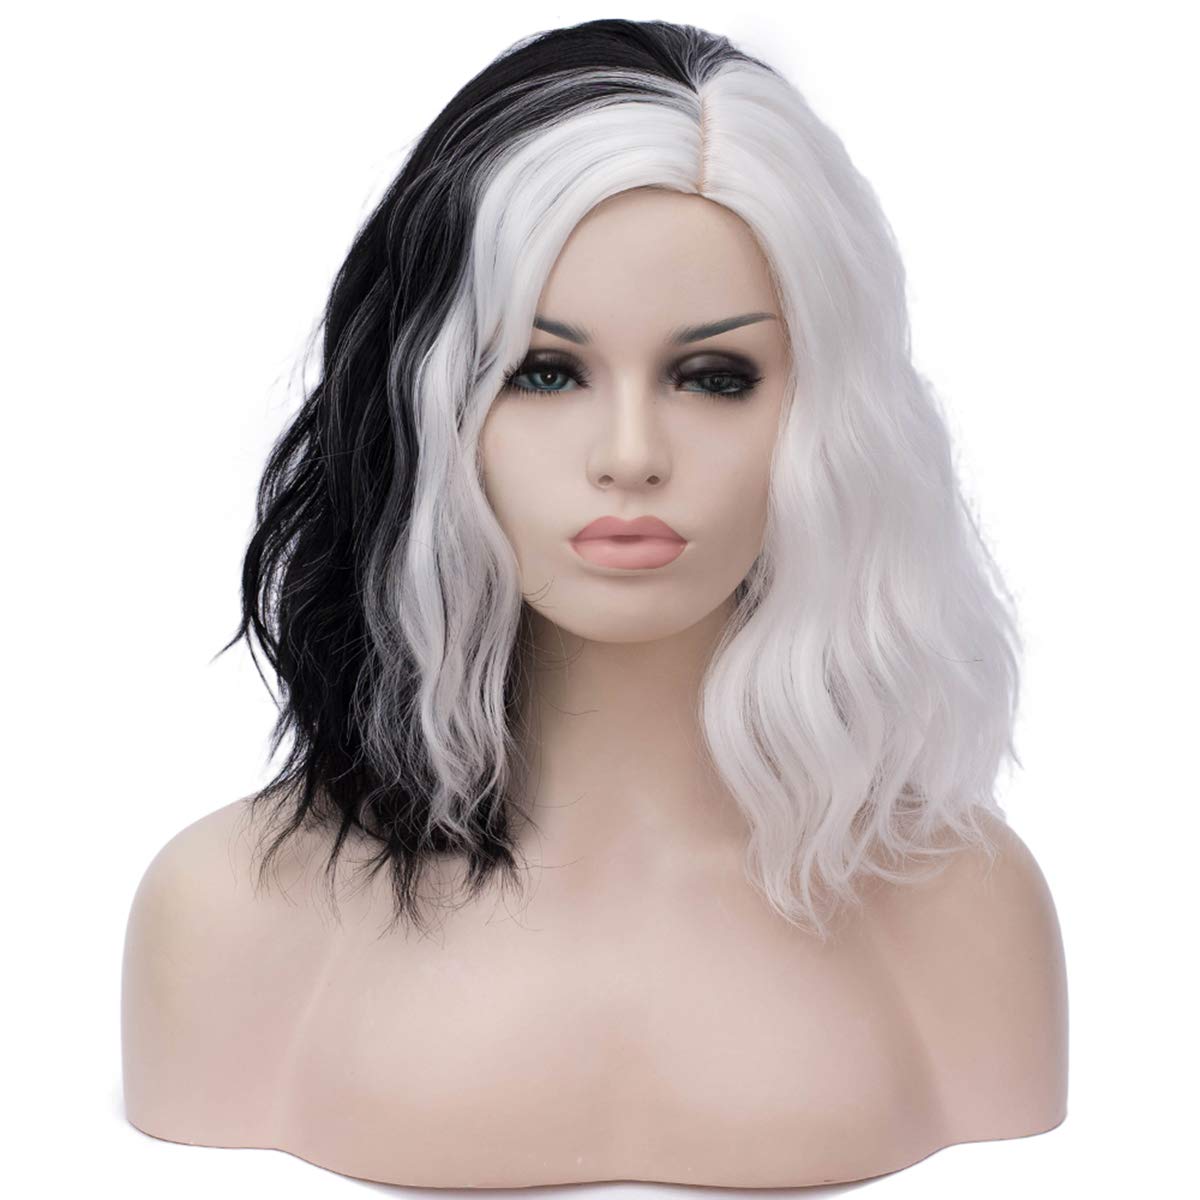 Price:$16.95    Mildiso Black and White Cosplay Wig for Cruella Deville Costume Short Colored Hair Wig + Cap M058C  Beauty